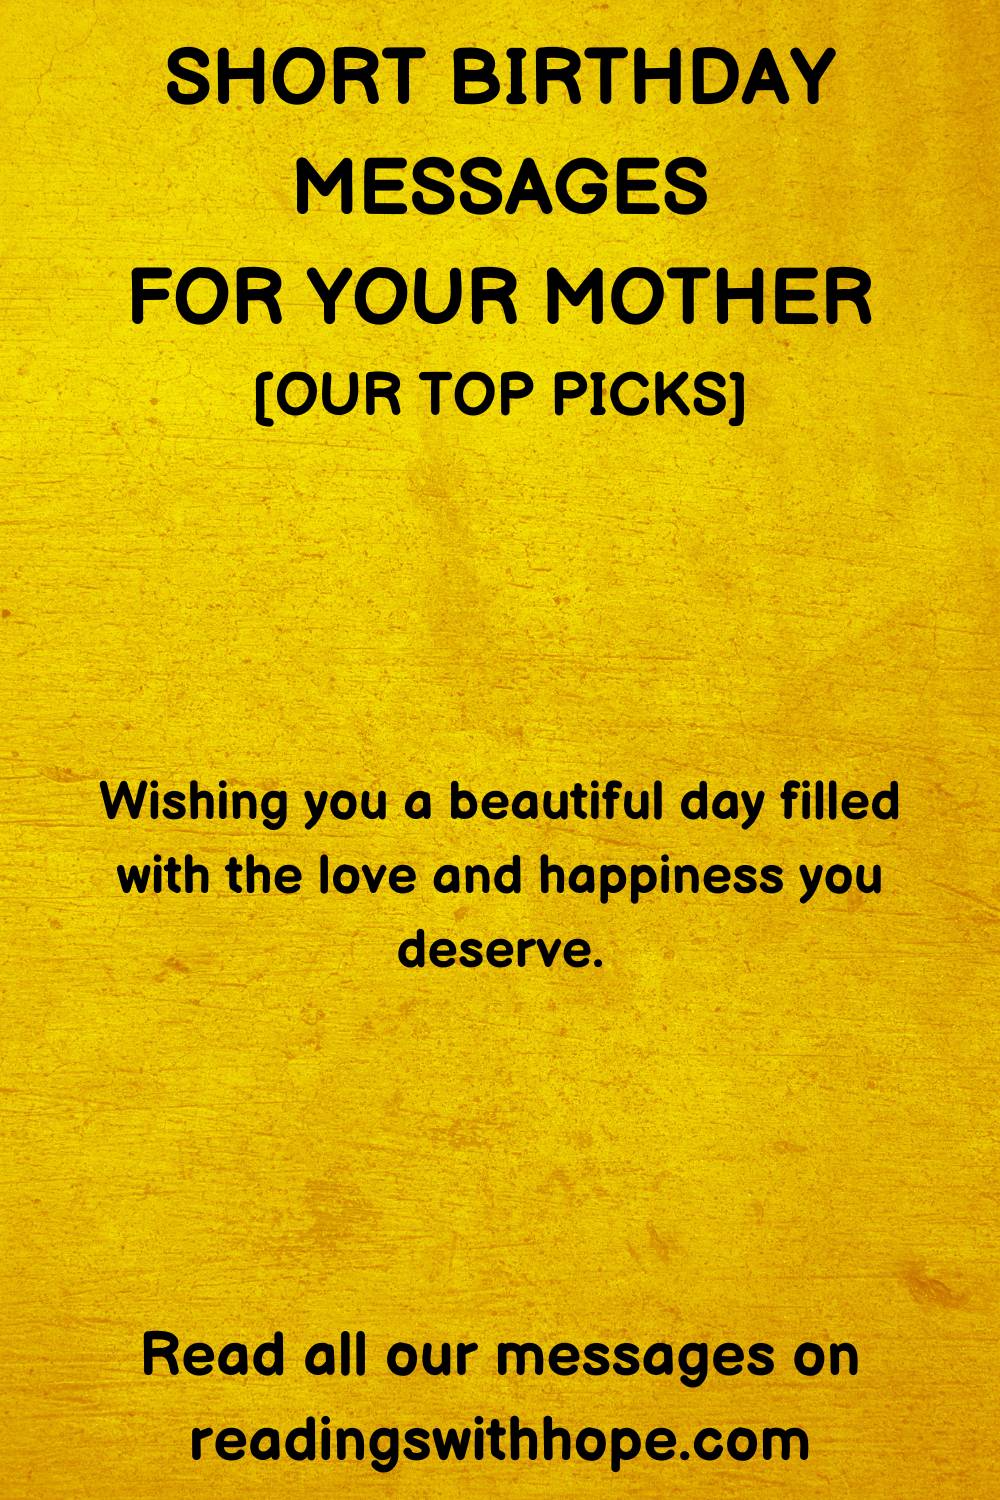 Short Happy Birthday Messages For Mother